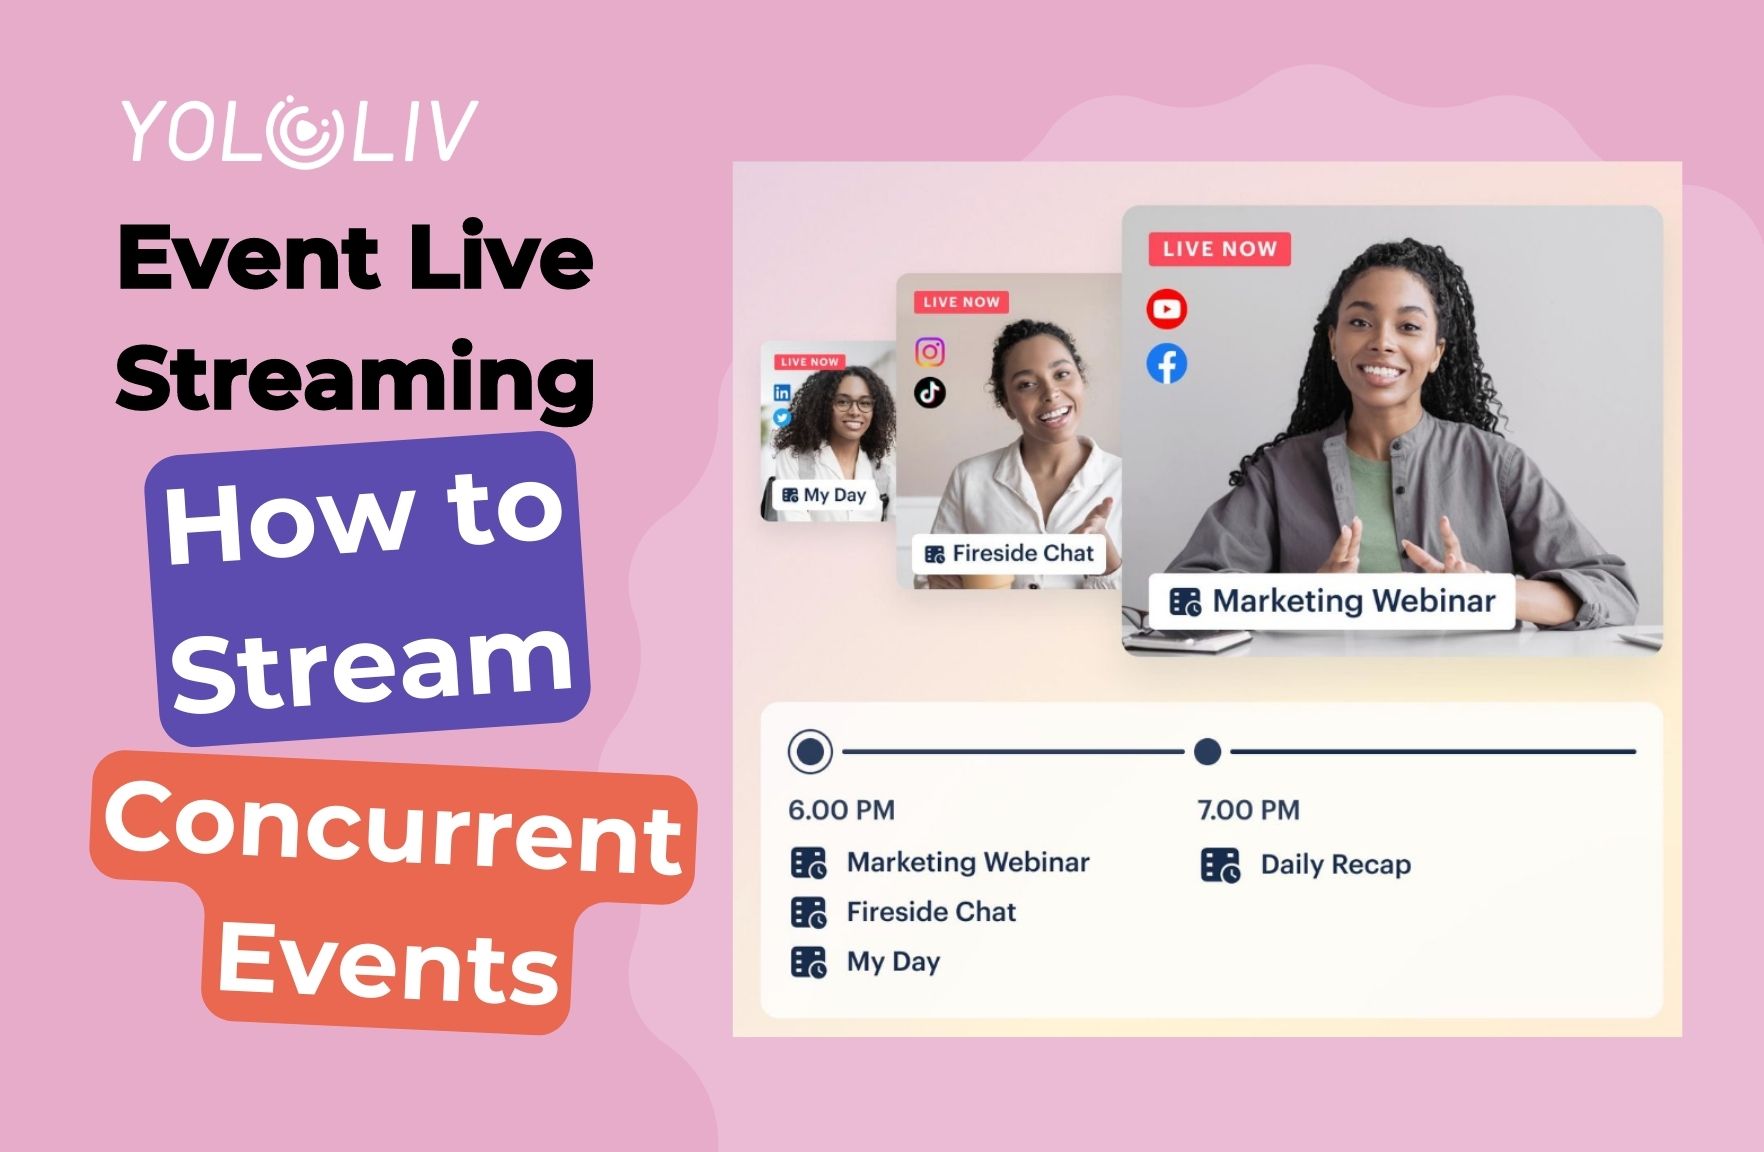 Event Live Streaming How to Stream Concurrent Events?